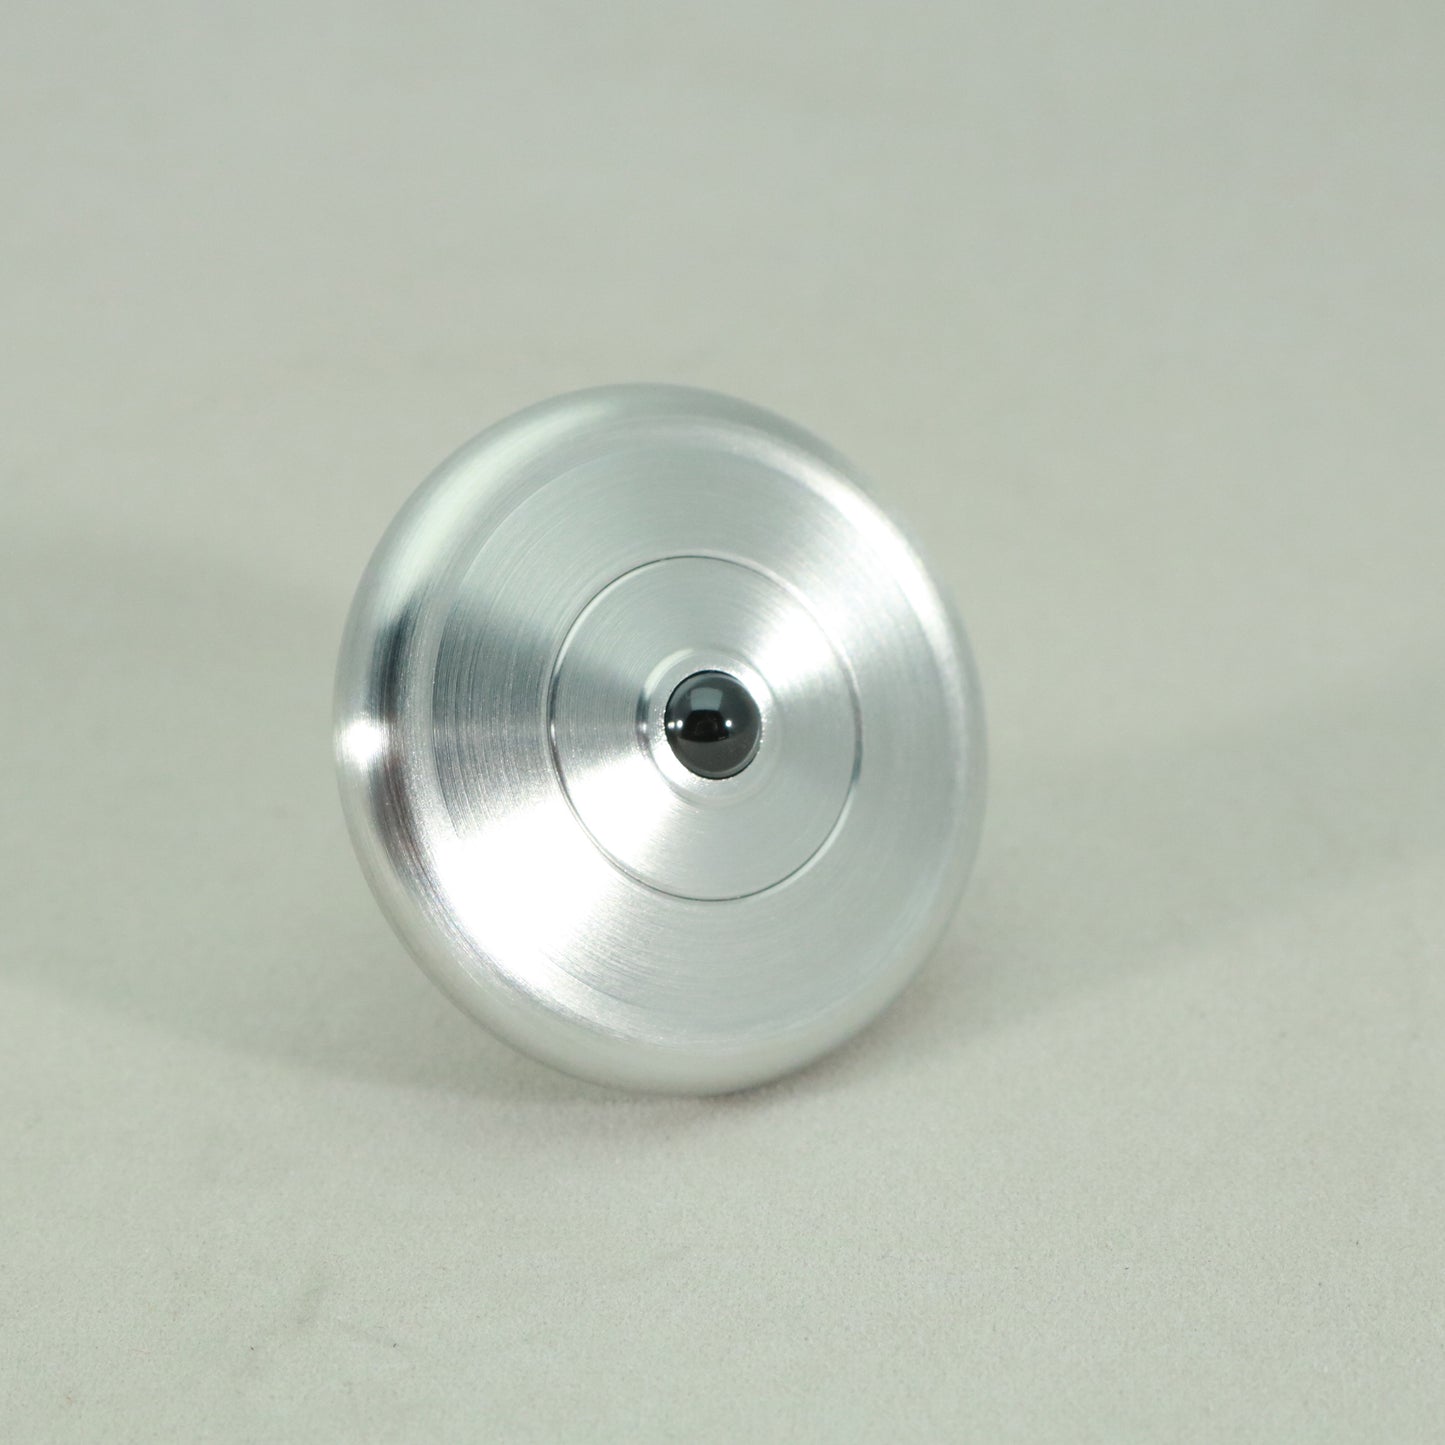 Ceramic bearing on the brushed aluminum version of the M3 precision spinning top by Kemner Design